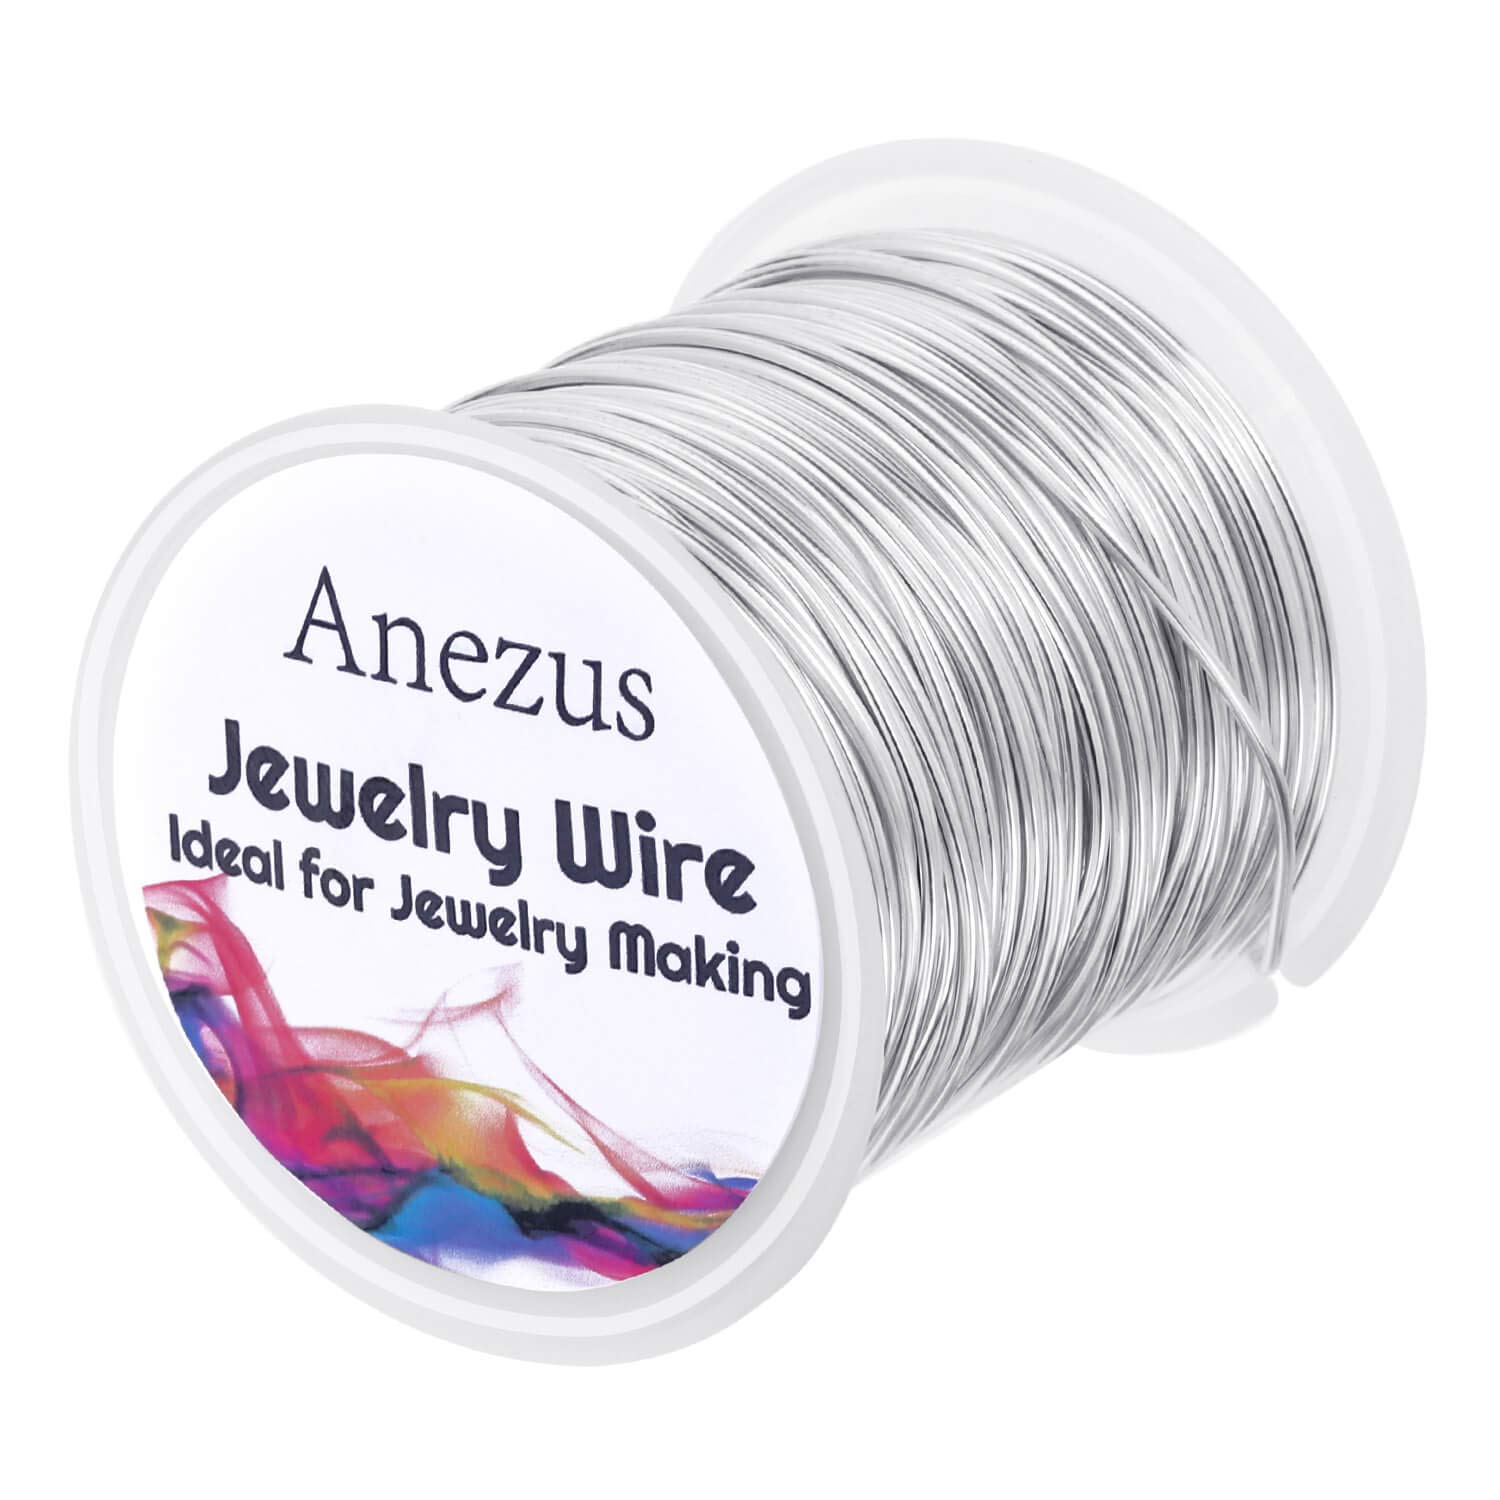 Anezus 18 Gauge Jewelry Wire for Jewelry Making, anezus Craft Wire Tarnish  Resistant Copper Beading Wire for Jewelry Making Supplies and Crafting (18